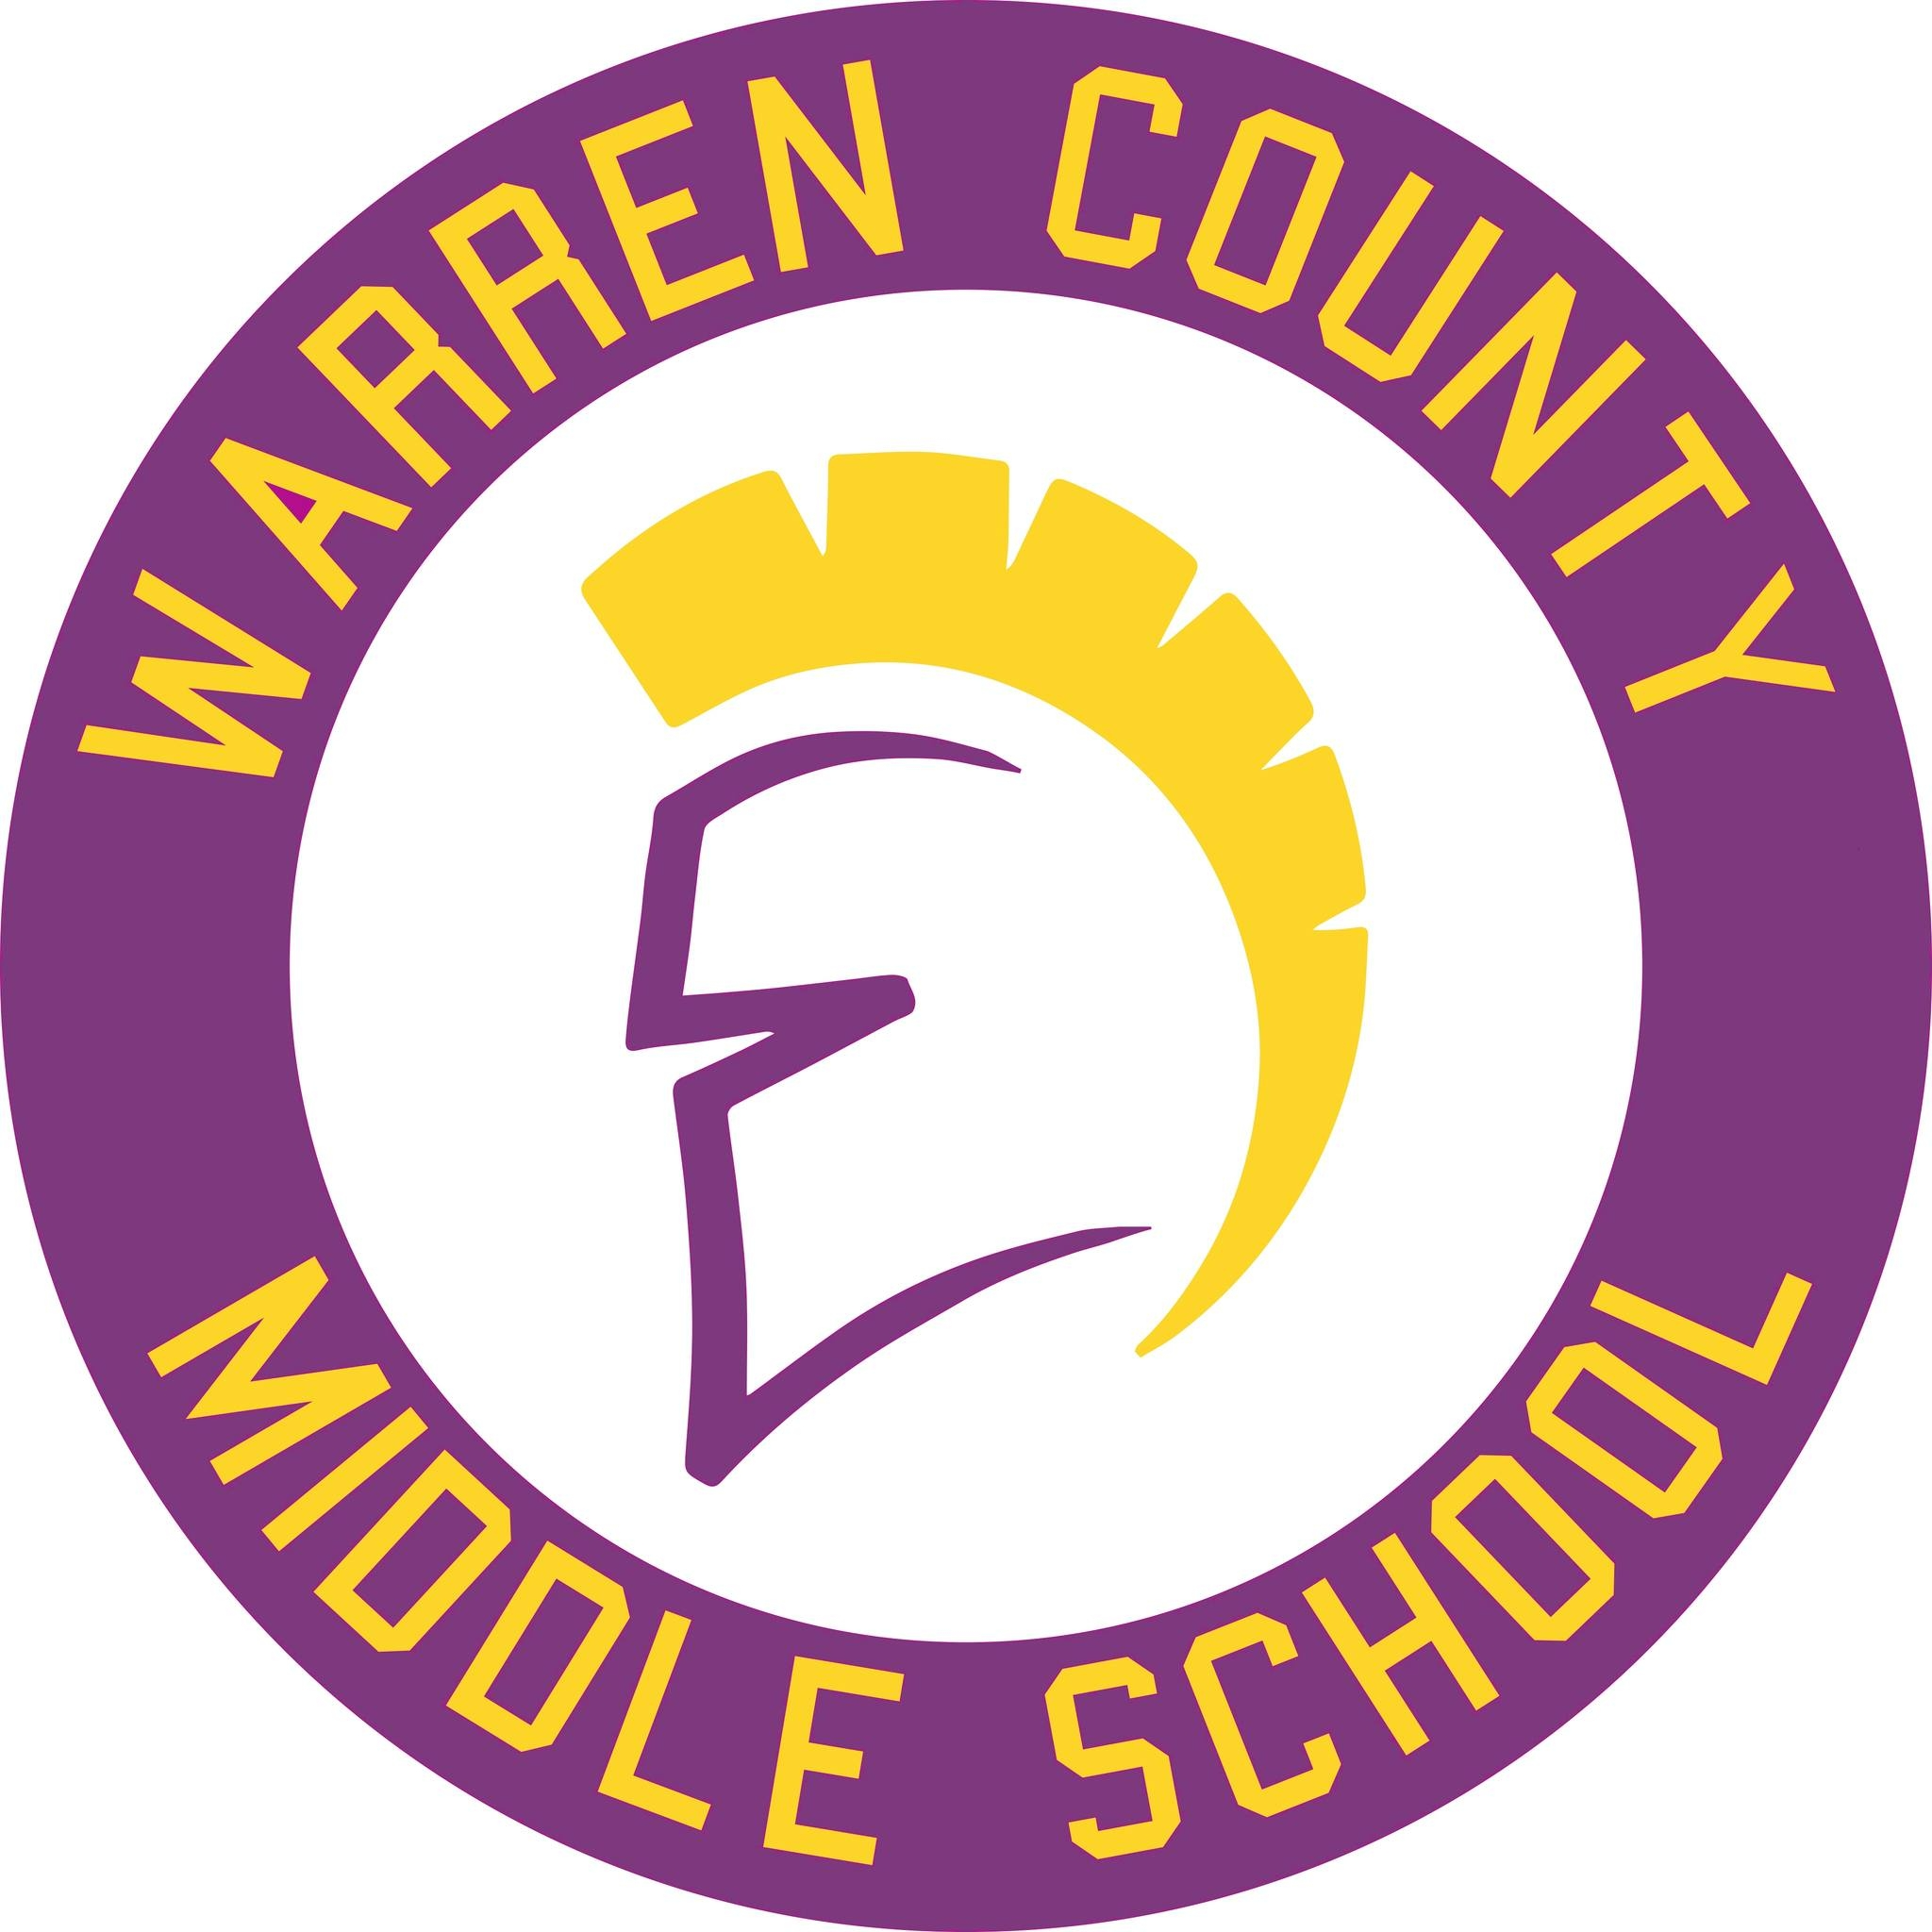 Warren County Middle School with a warrior helmet inside a circle